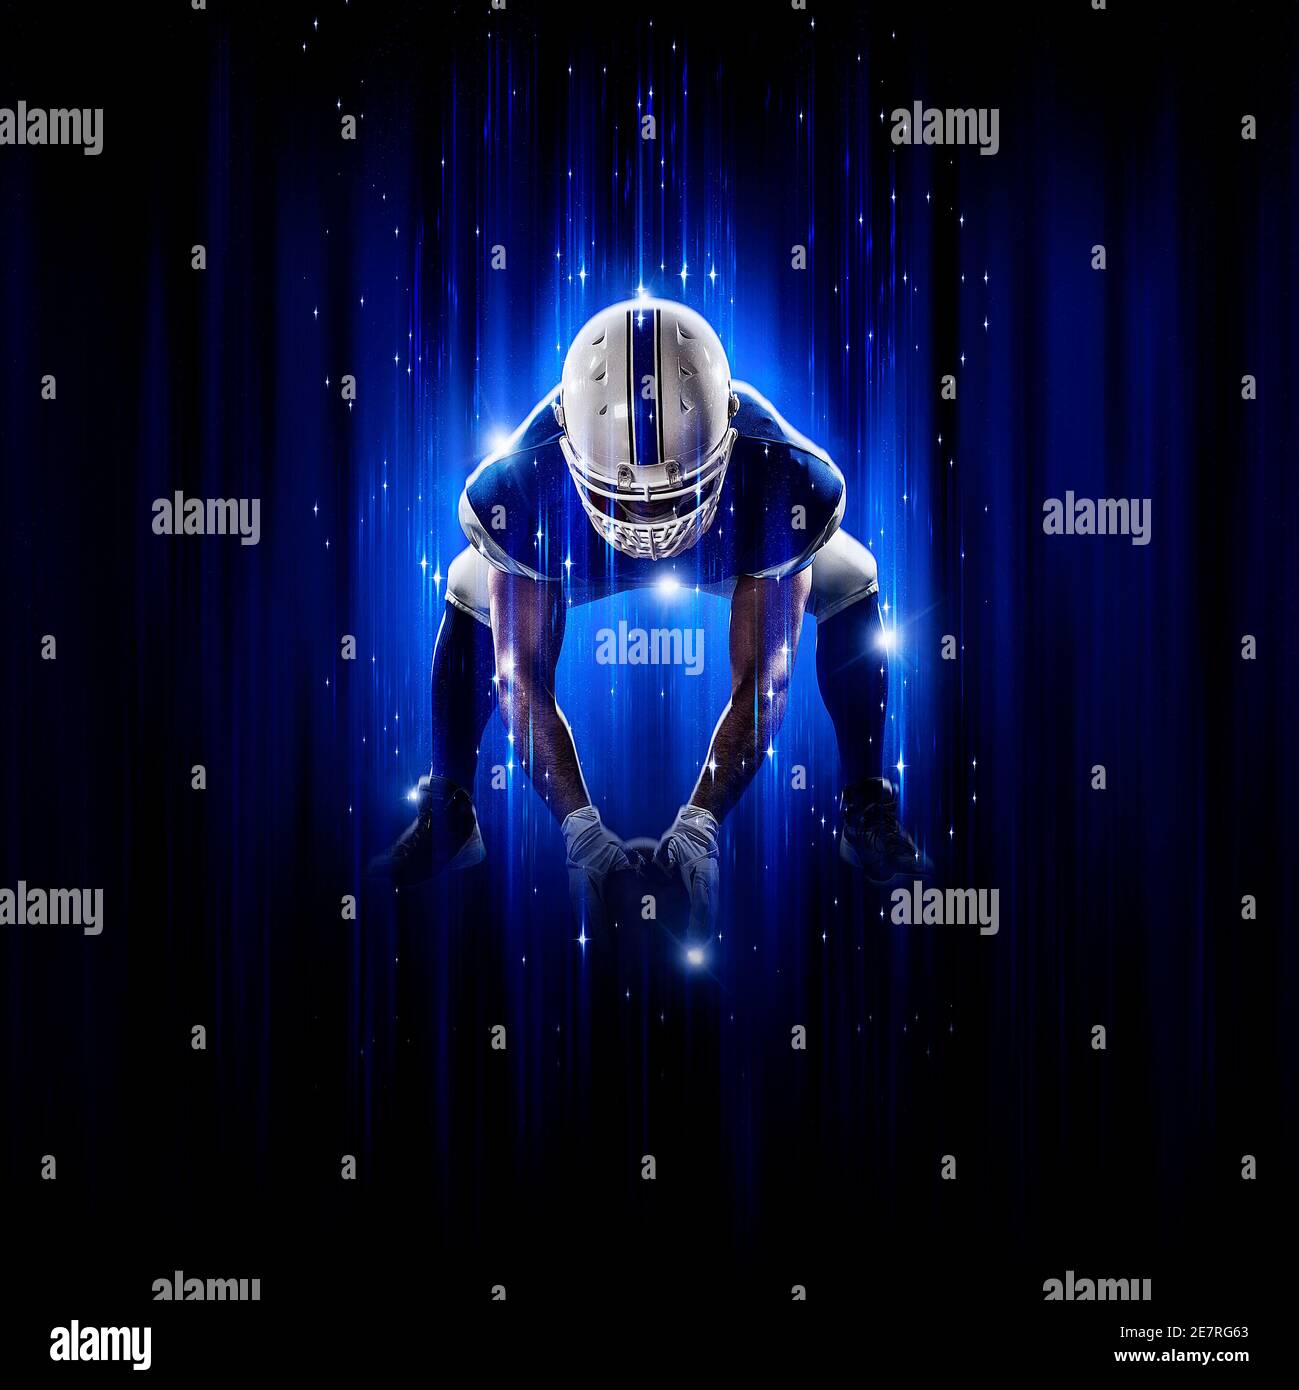 Football Player player with a superhero pose  wearing a blue uniform on a black background with blue lights. Stock Photo